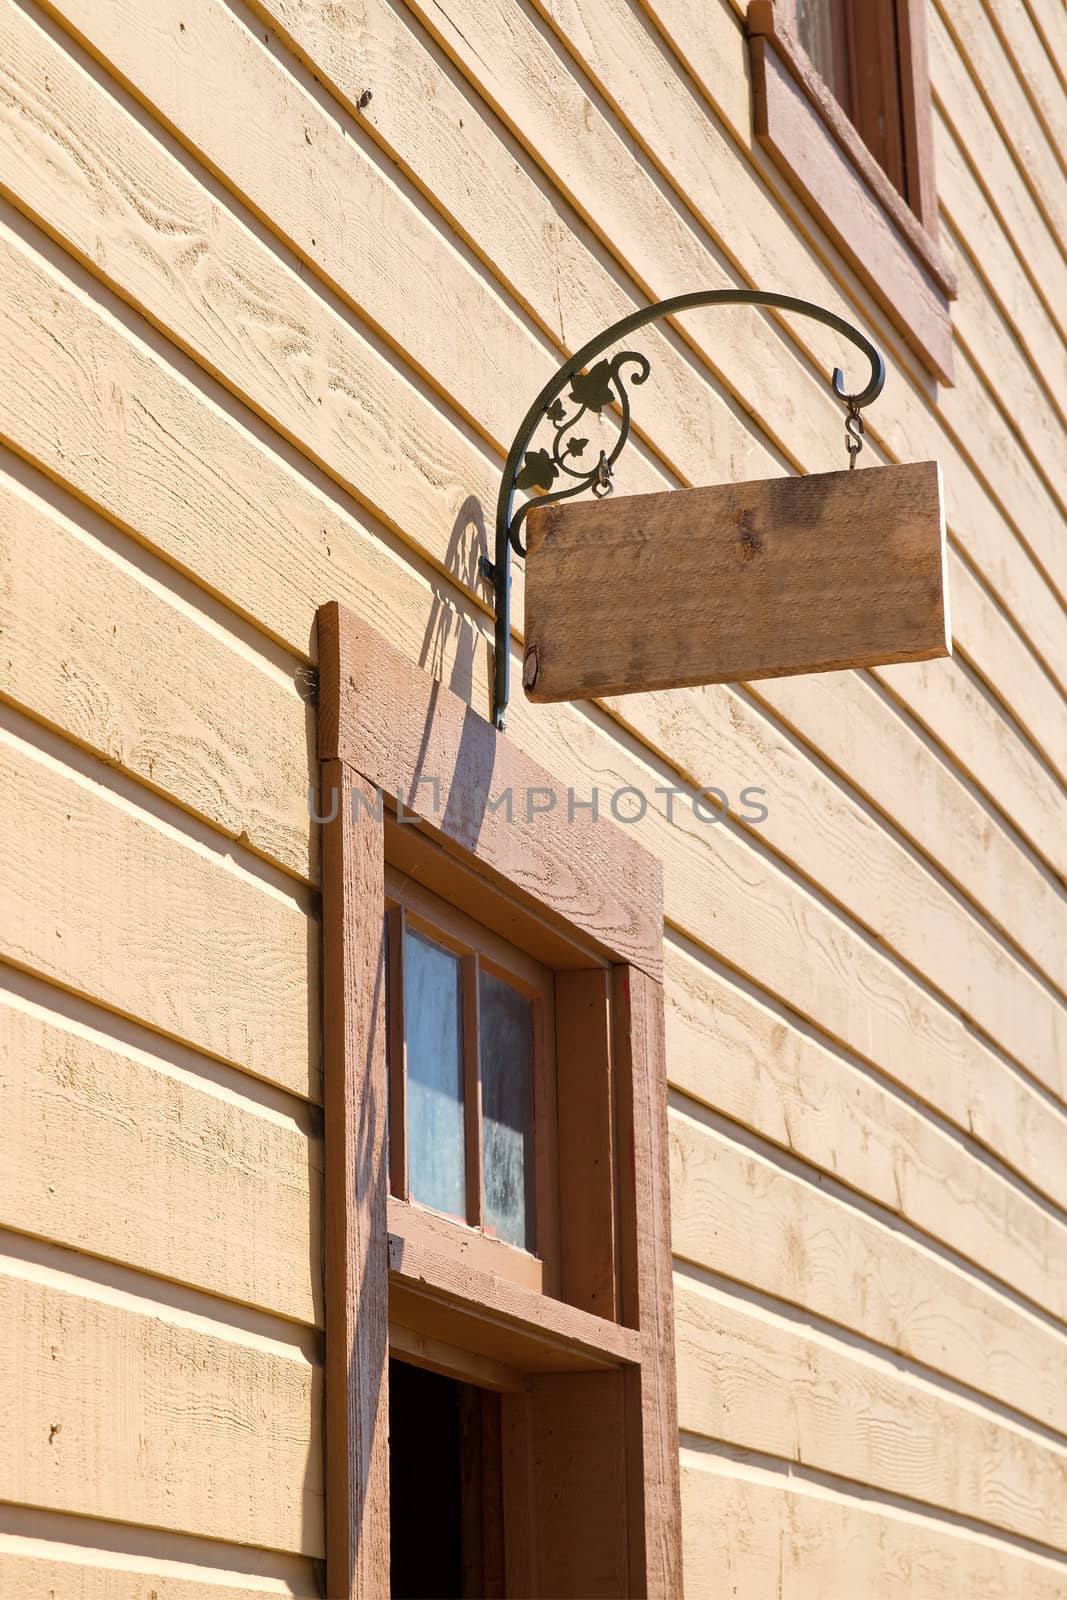 Wood and Rod Iron Signage on Side of Historic Building